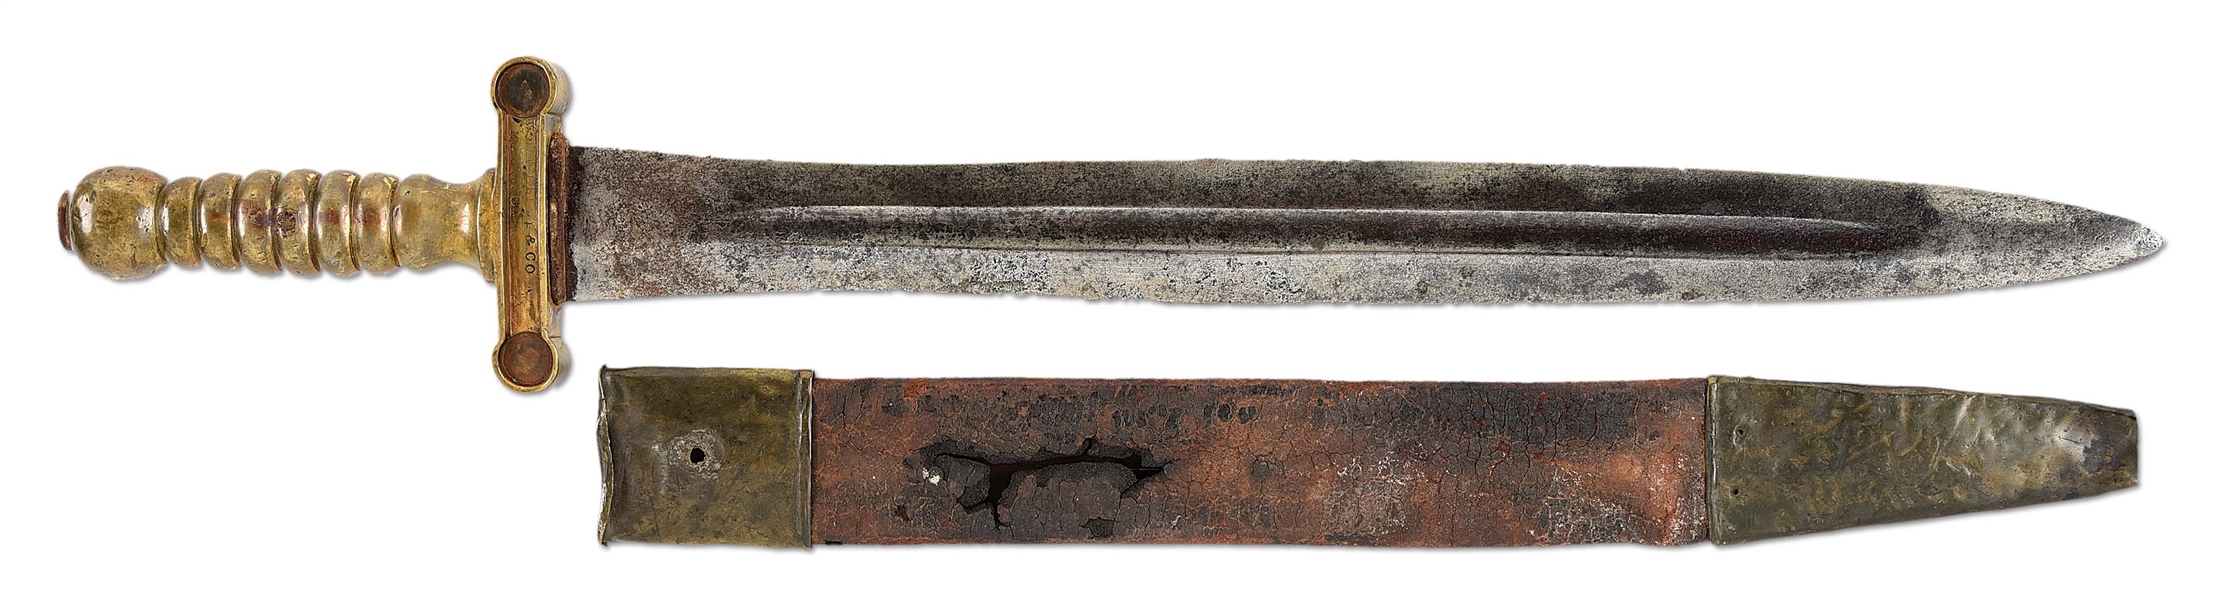 RARE MCELROY CONFEDERATE ARTILLERY SHORT SWORD/NAVAL CUTLASS RECOVERED FROM THE BATTLE OF SOUTH MOUNTAIN.